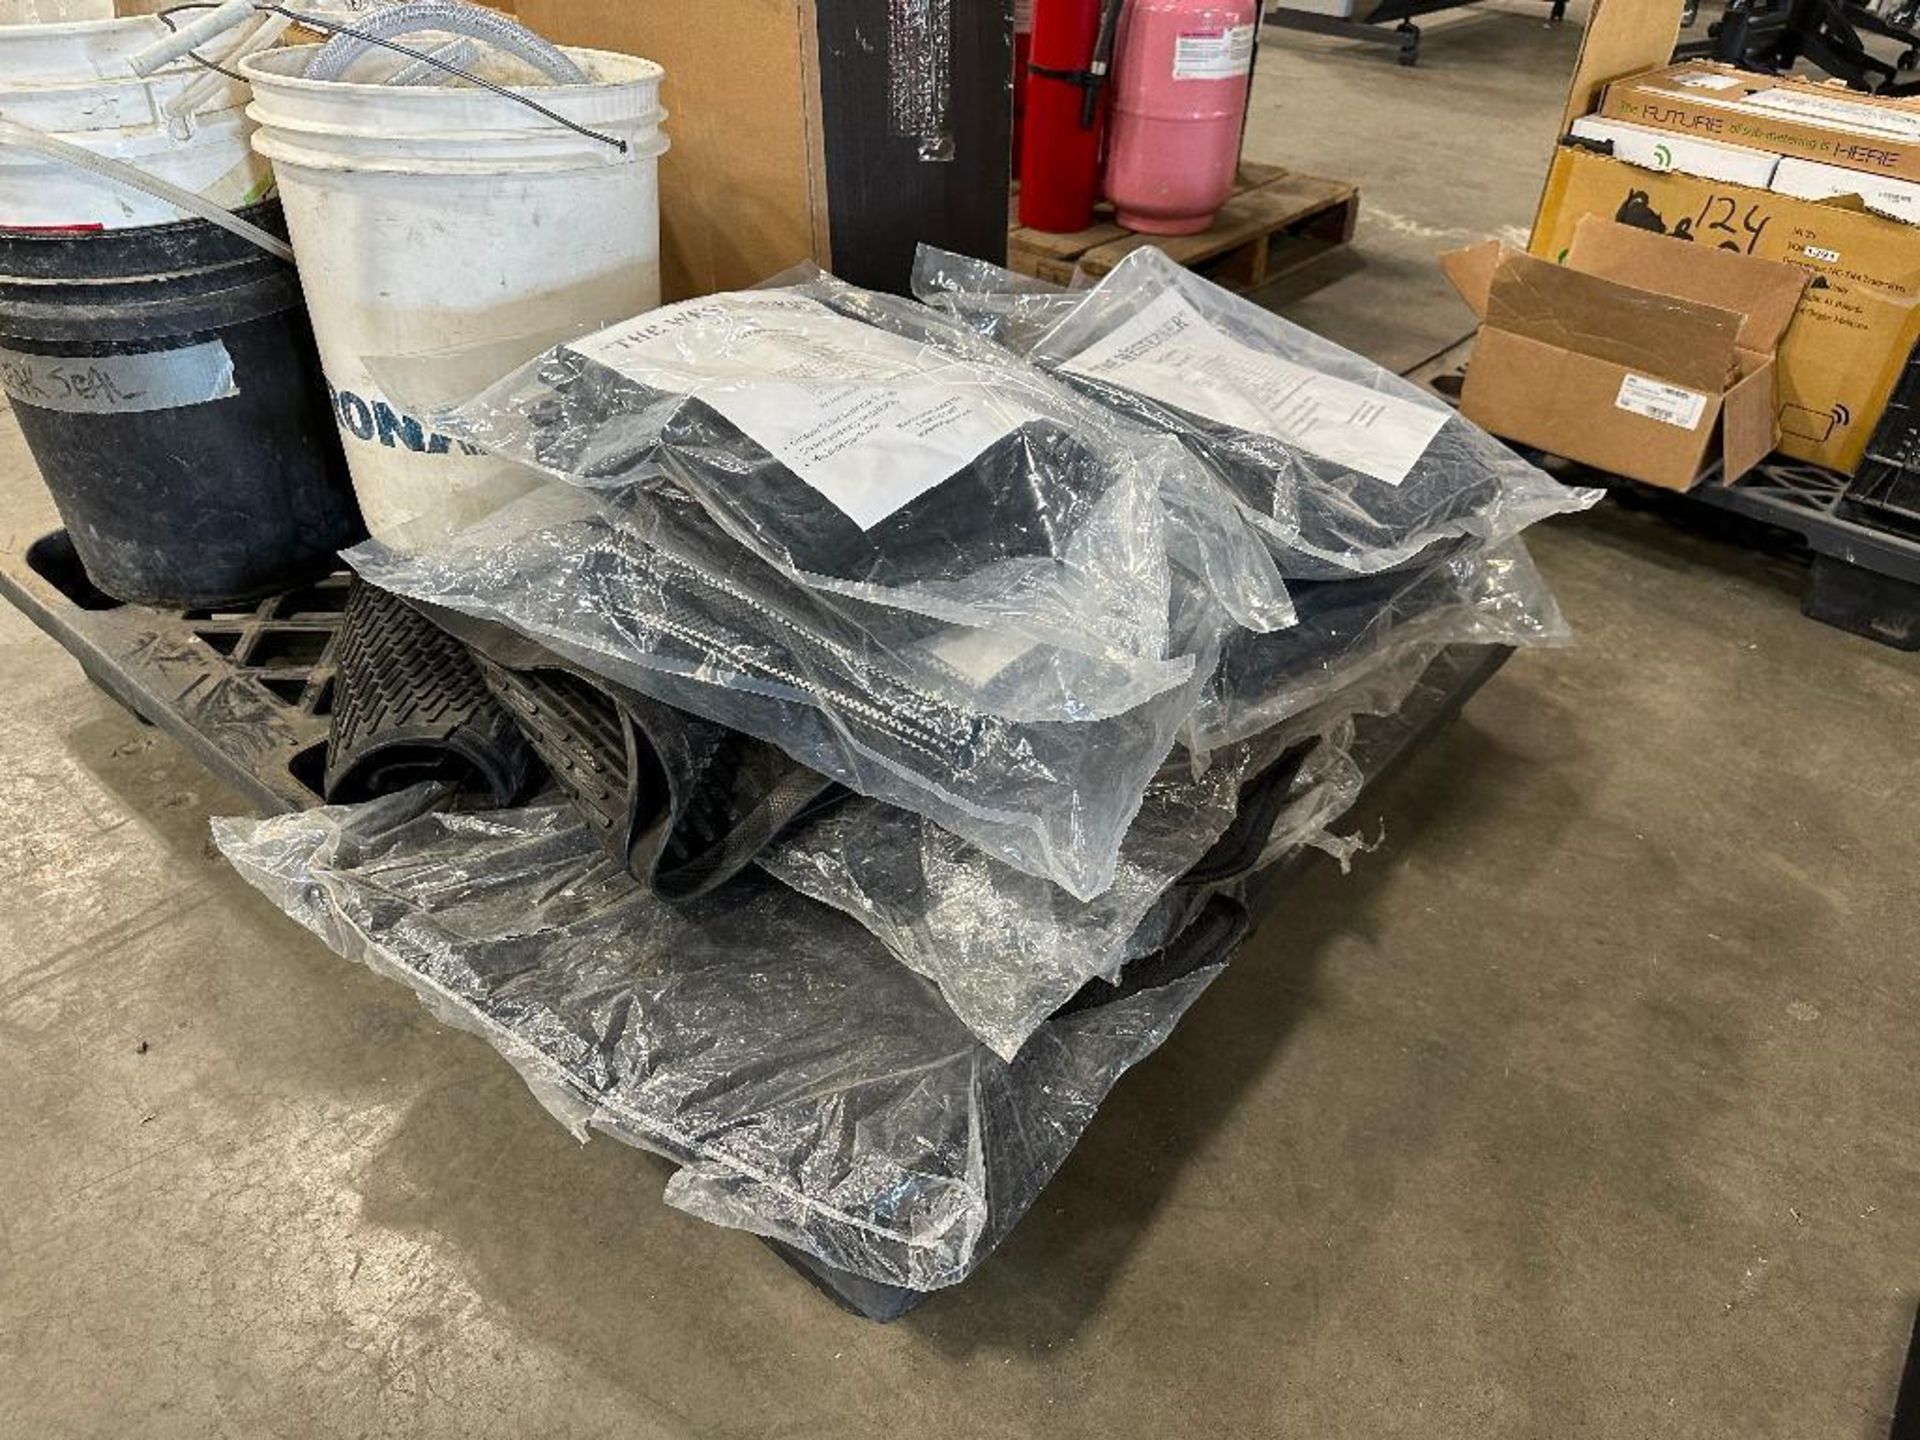 Pallet of Asst. Seat Covers, Floor Mats, Pipe Clamps, Brackets, etc. - Image 9 of 9